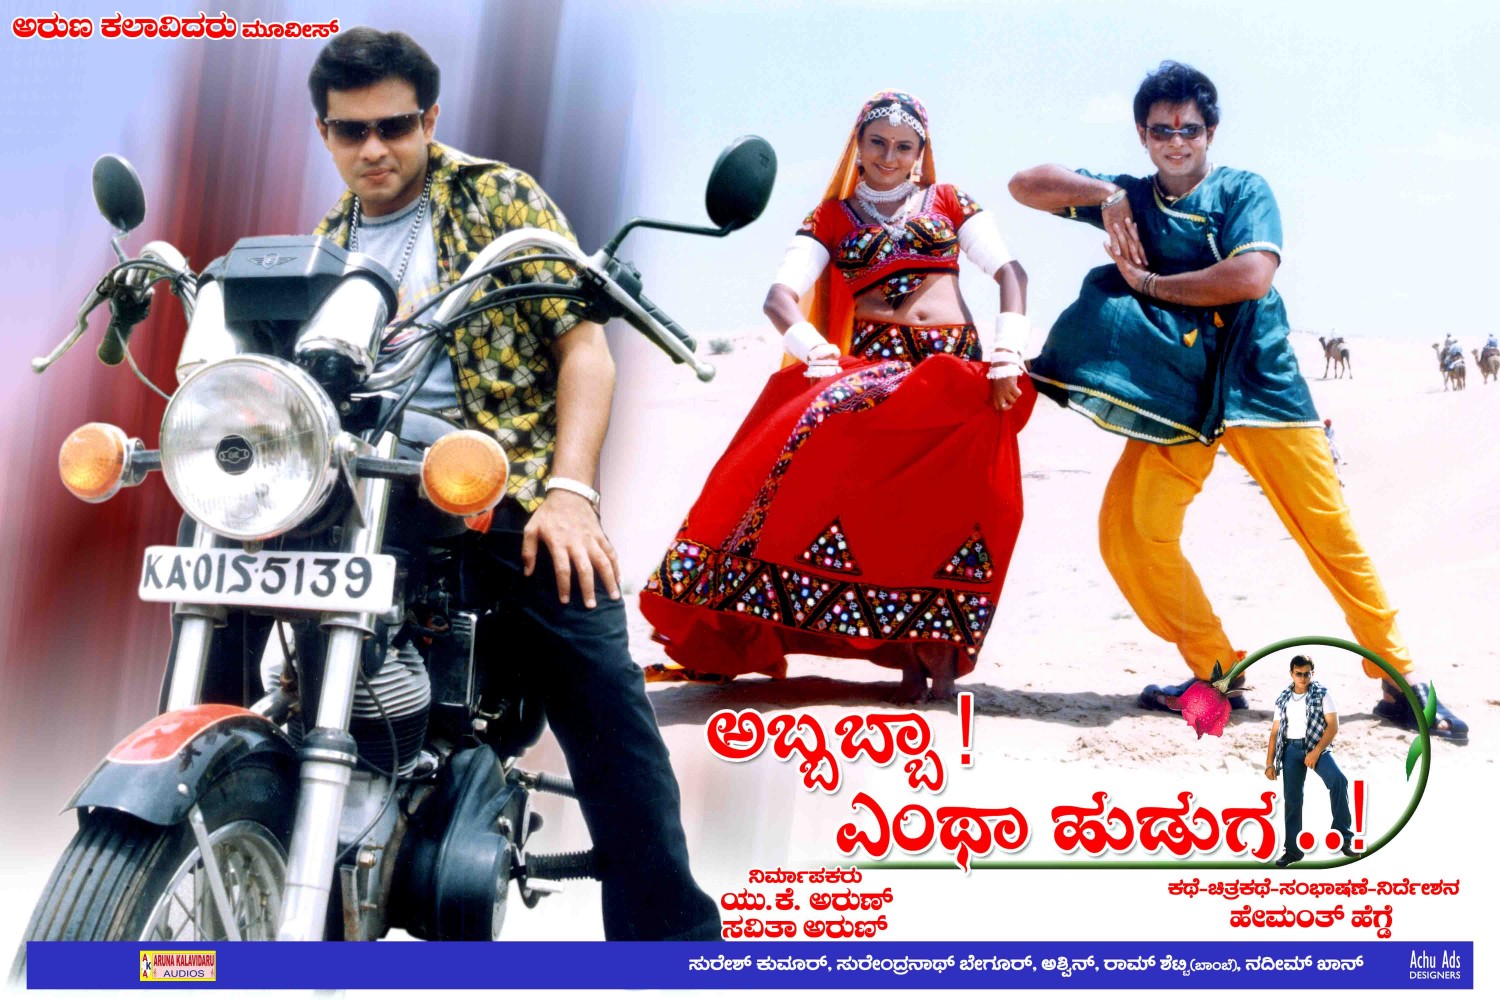 Extra Large Movie Poster Image for Abba Abba Yentha Huduga (#2 of 2)